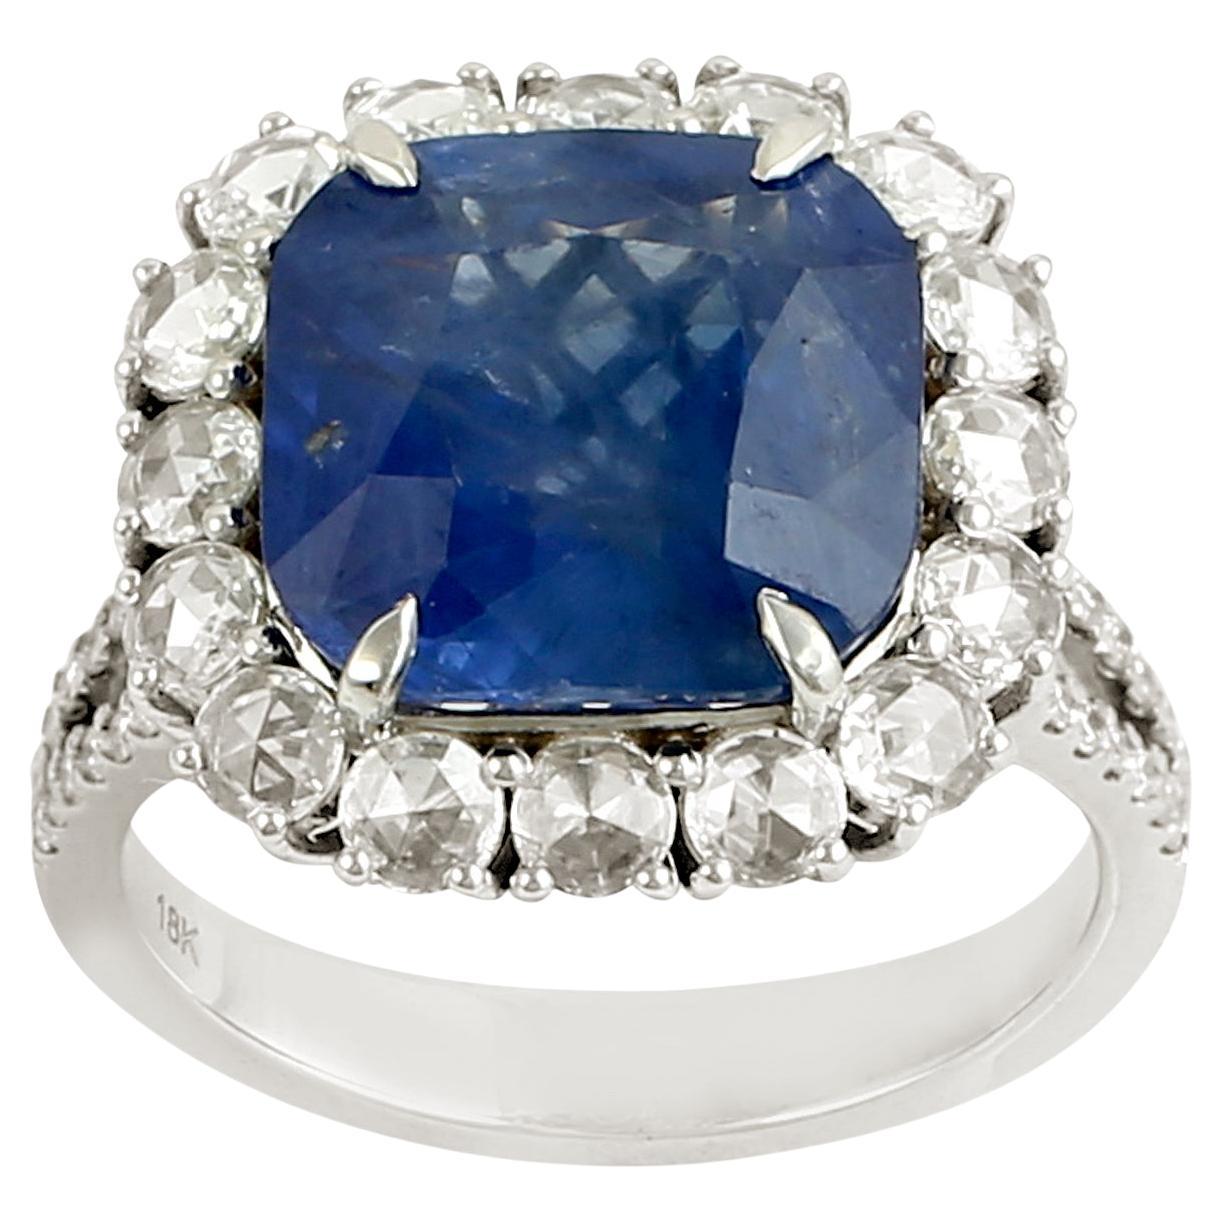 Cushion Shaped Blue Sapphire Cocktail Ring With Diamonds For Sale